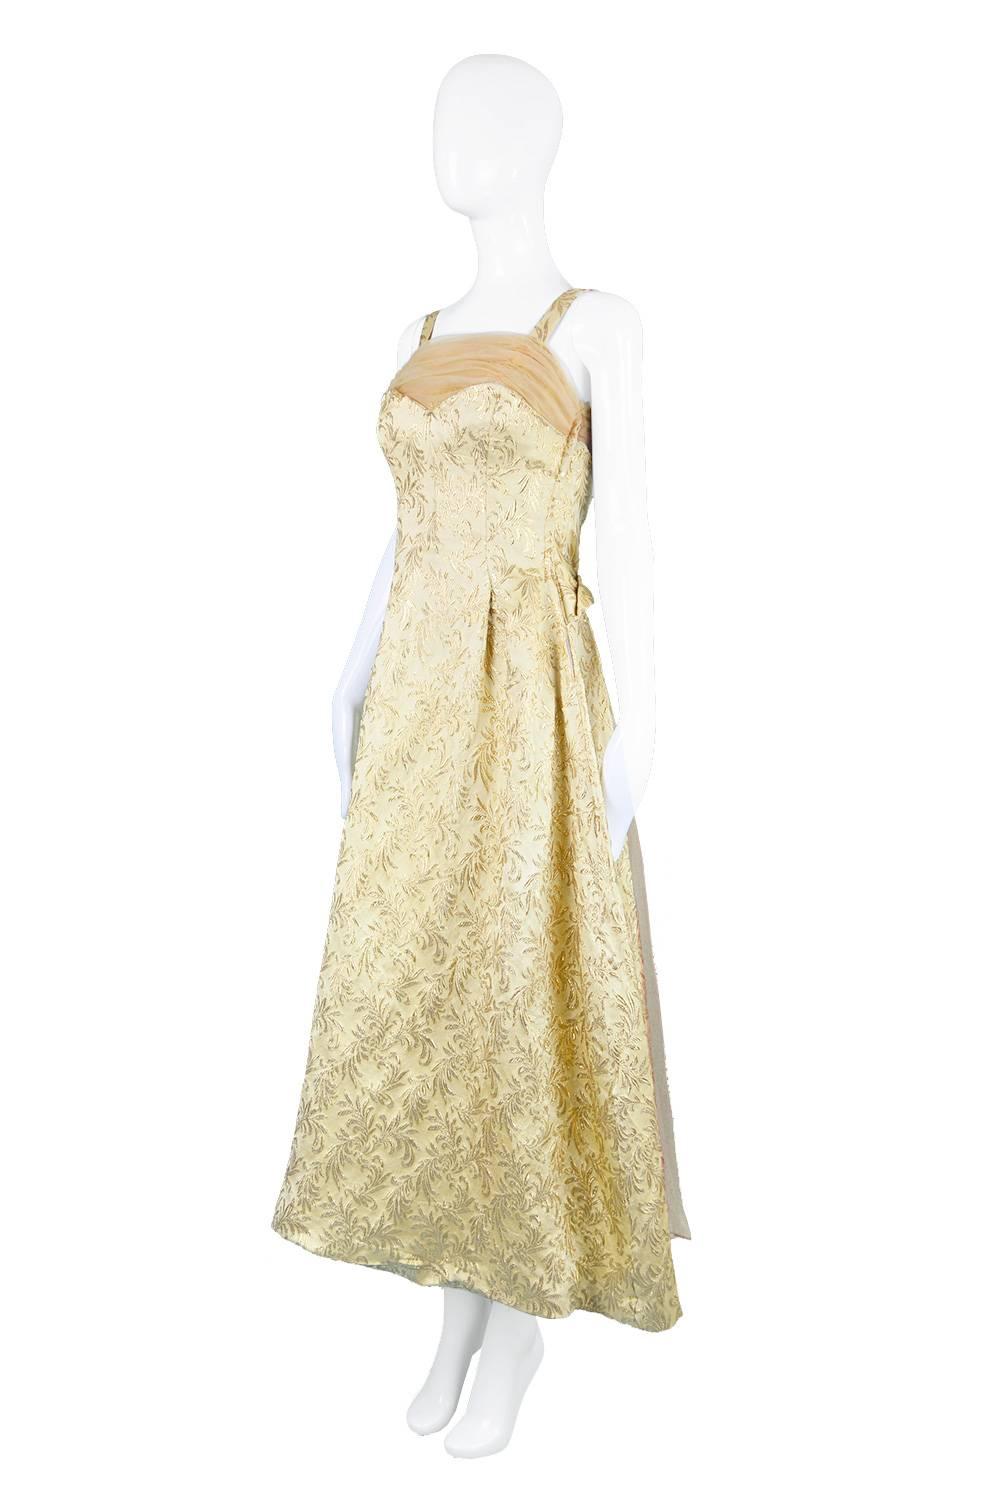 Women's Gold Brocade Evening Gown with Chiffon Train, 1950s For Sale